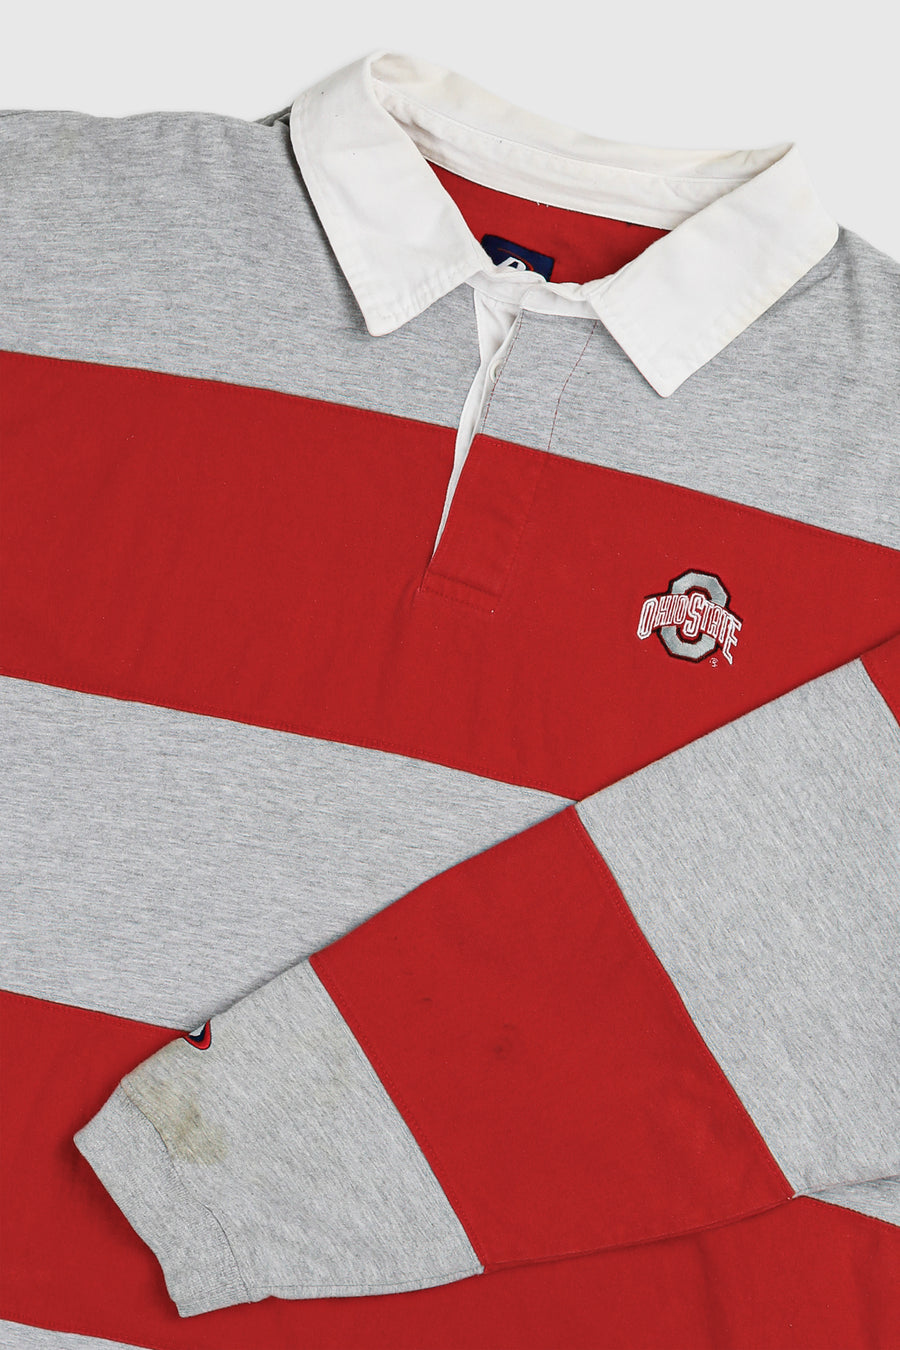 Vintage Ohio State Rugby Shirt - L